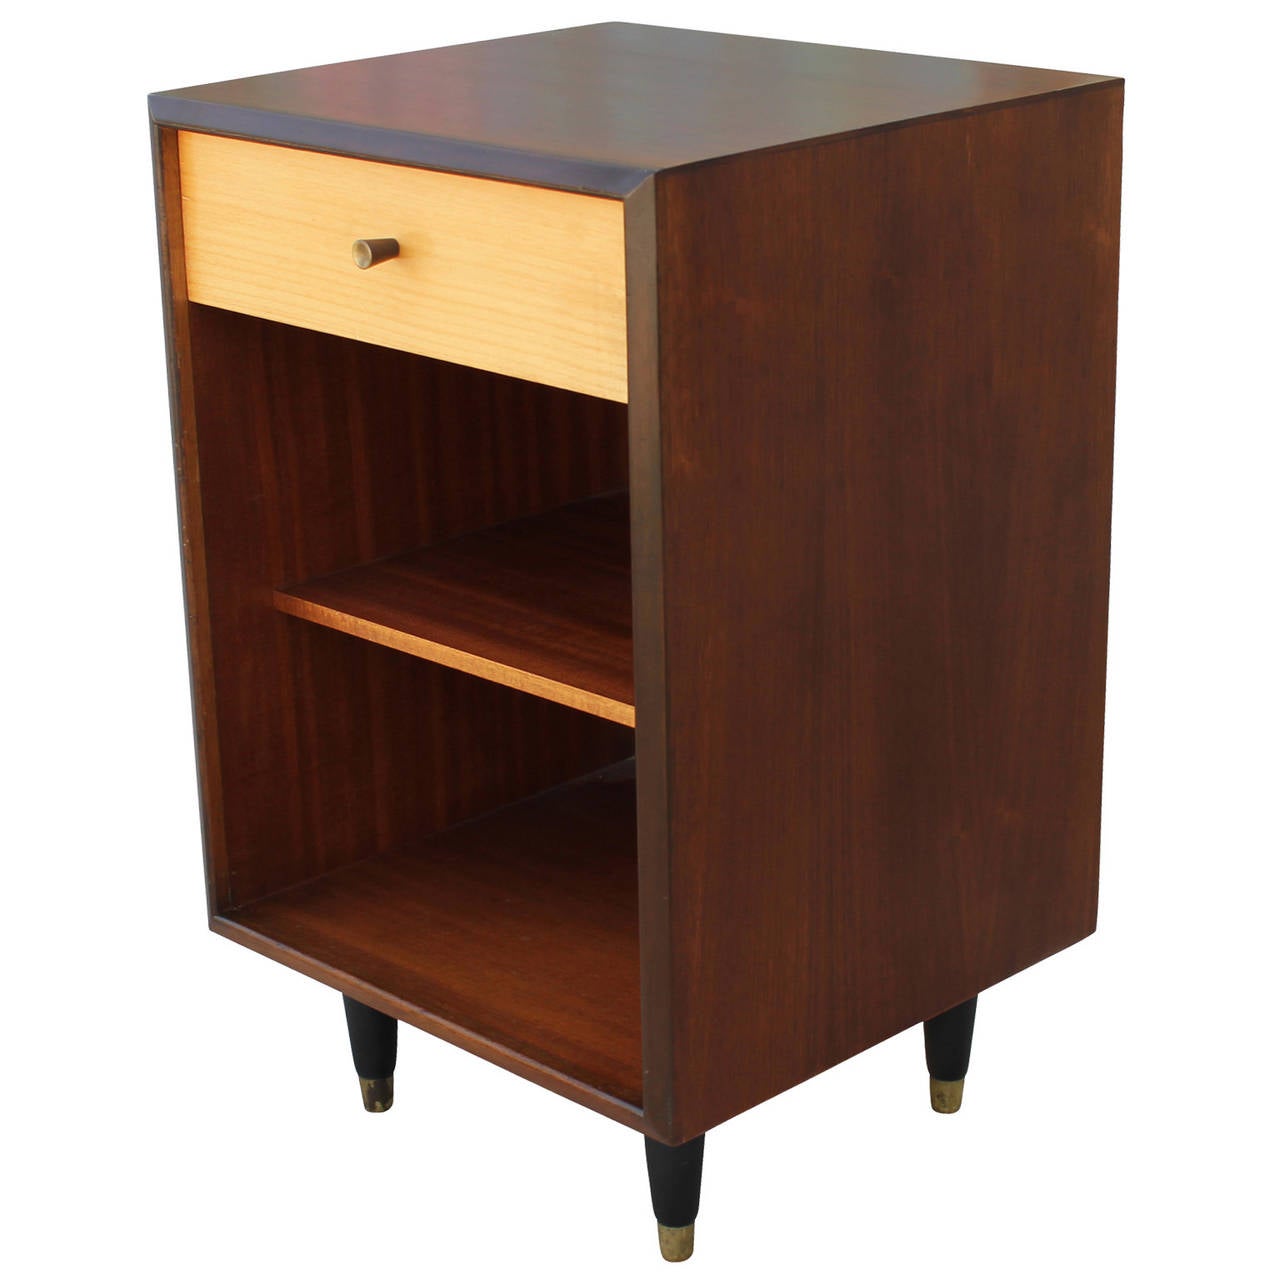 Beautiful pair of night stands by White & Newton. Nightstands have a single drawer and a large open cabinet. Drawer is in a blonde wood, contrasting the walnut shell. Black tapered legs are capped in brass.